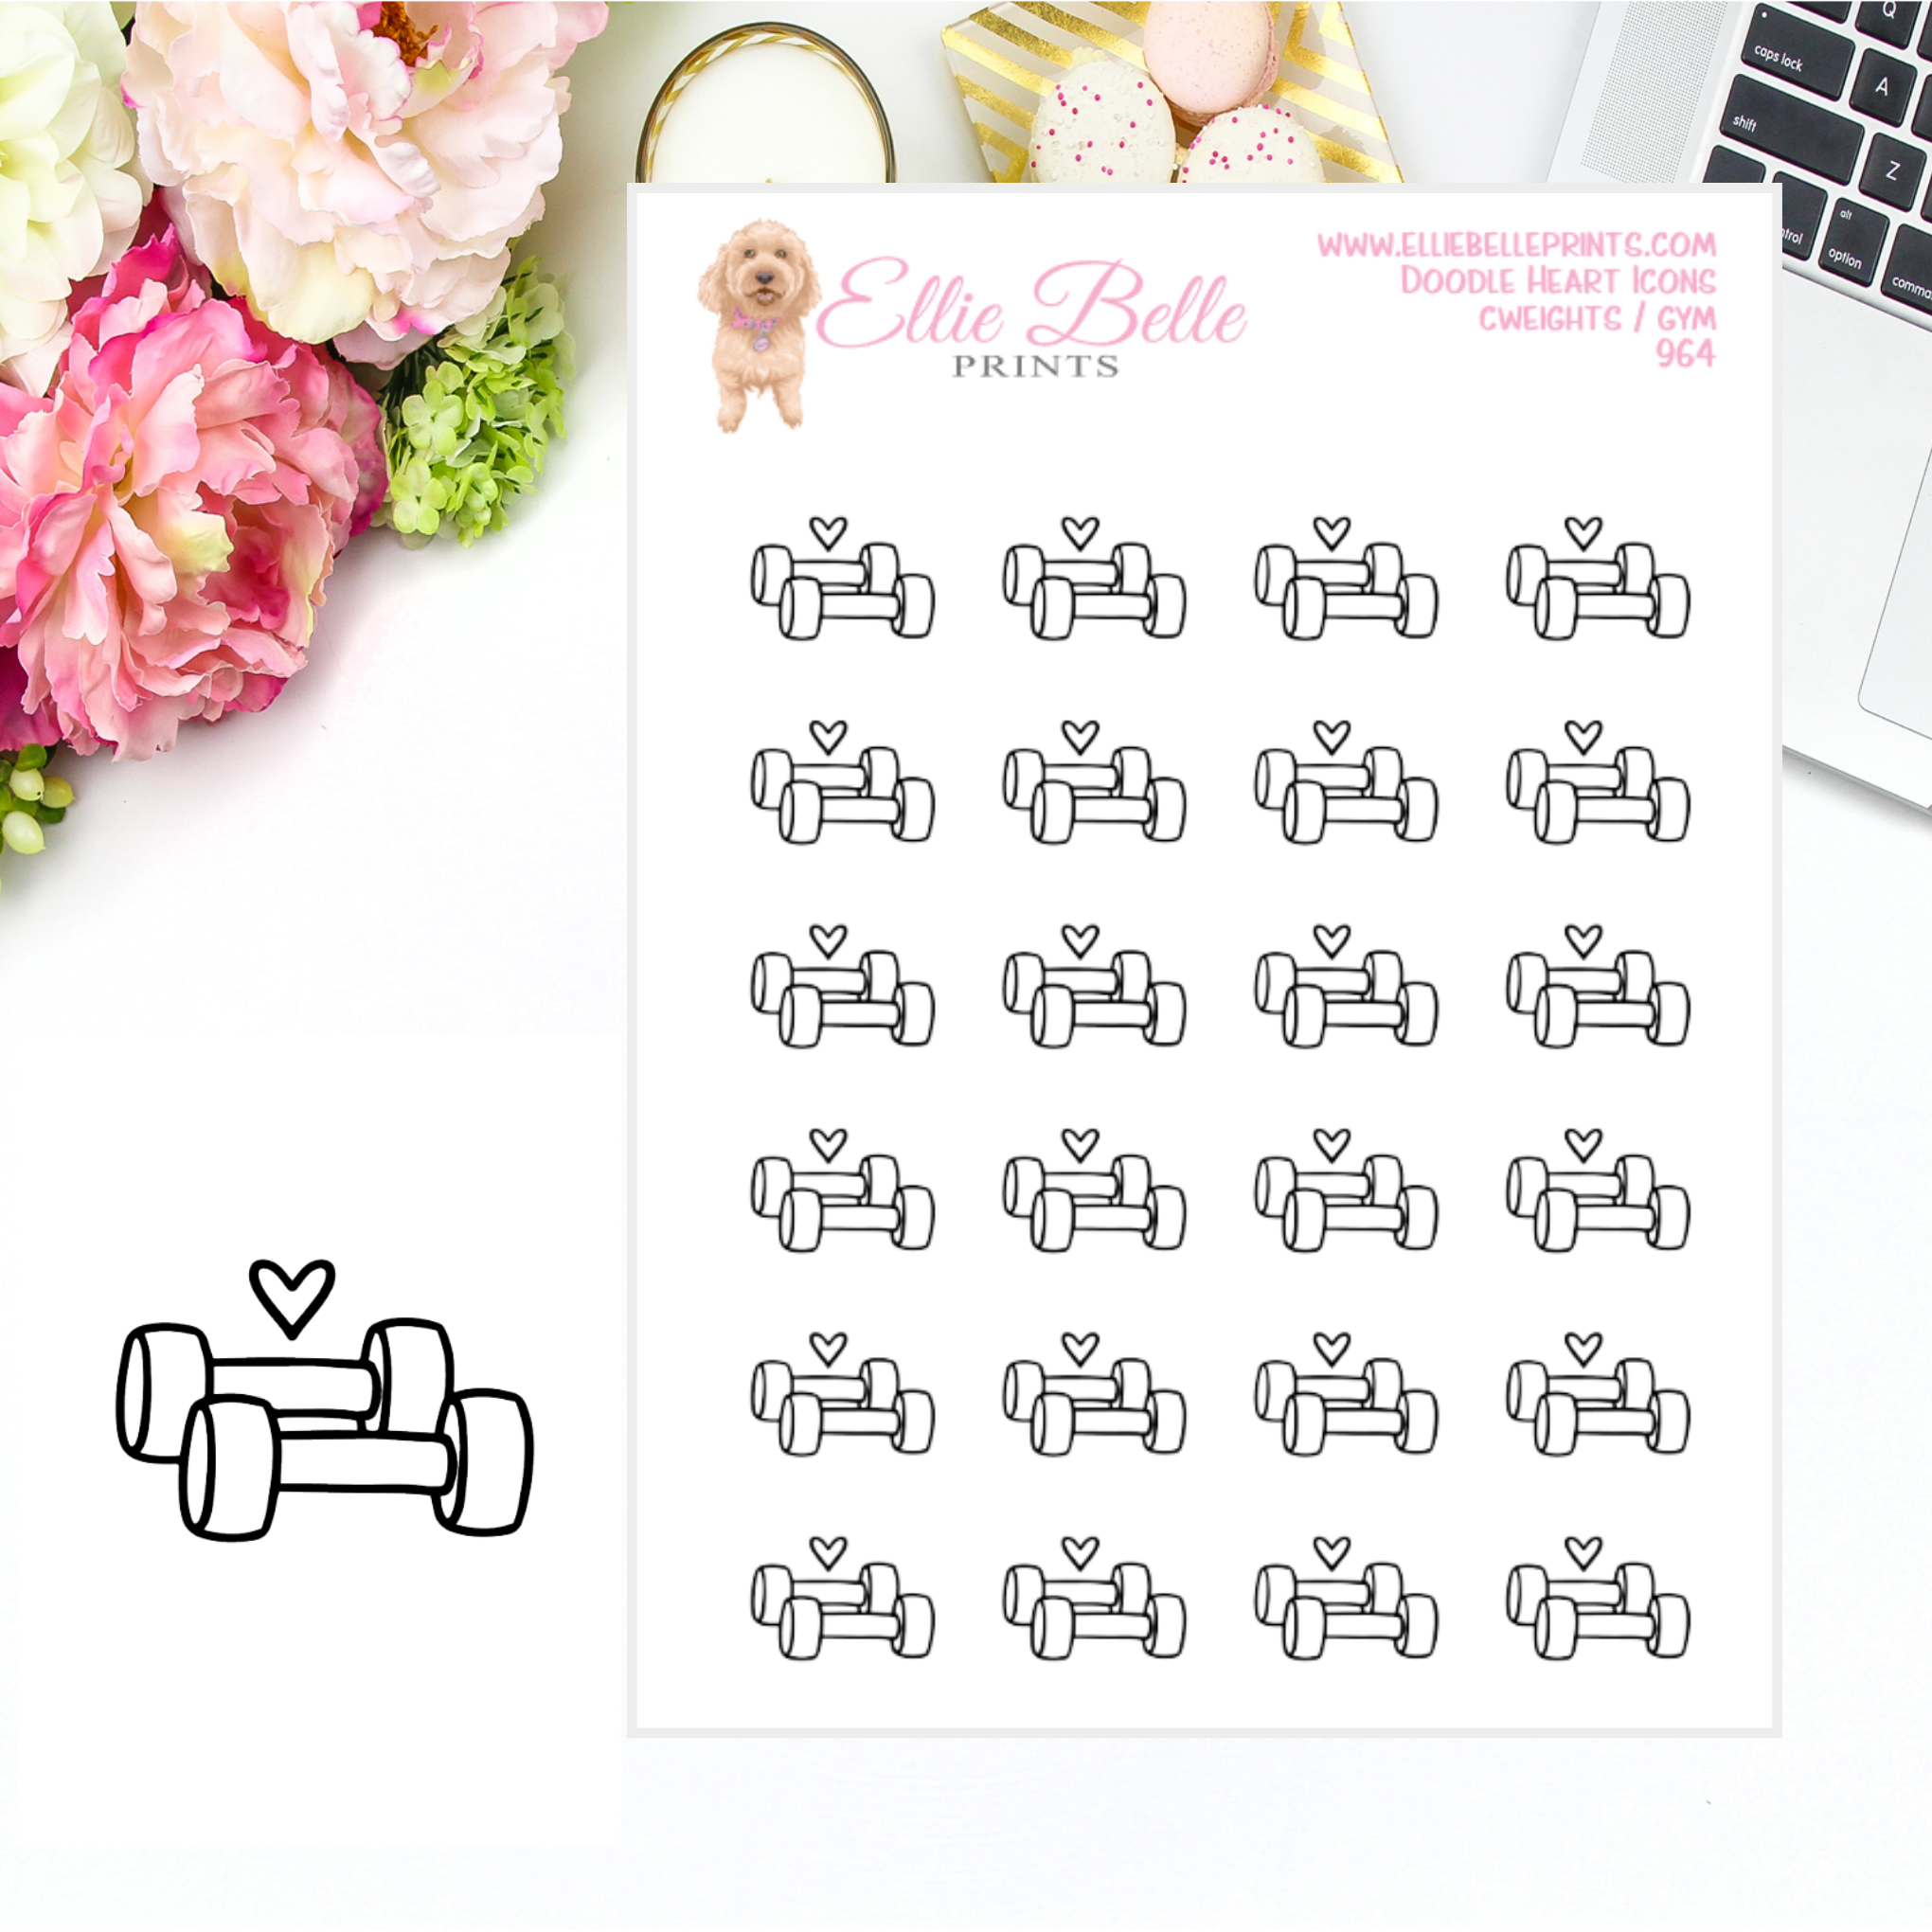 Weights / Gym Icons - Doodle Heart Icons